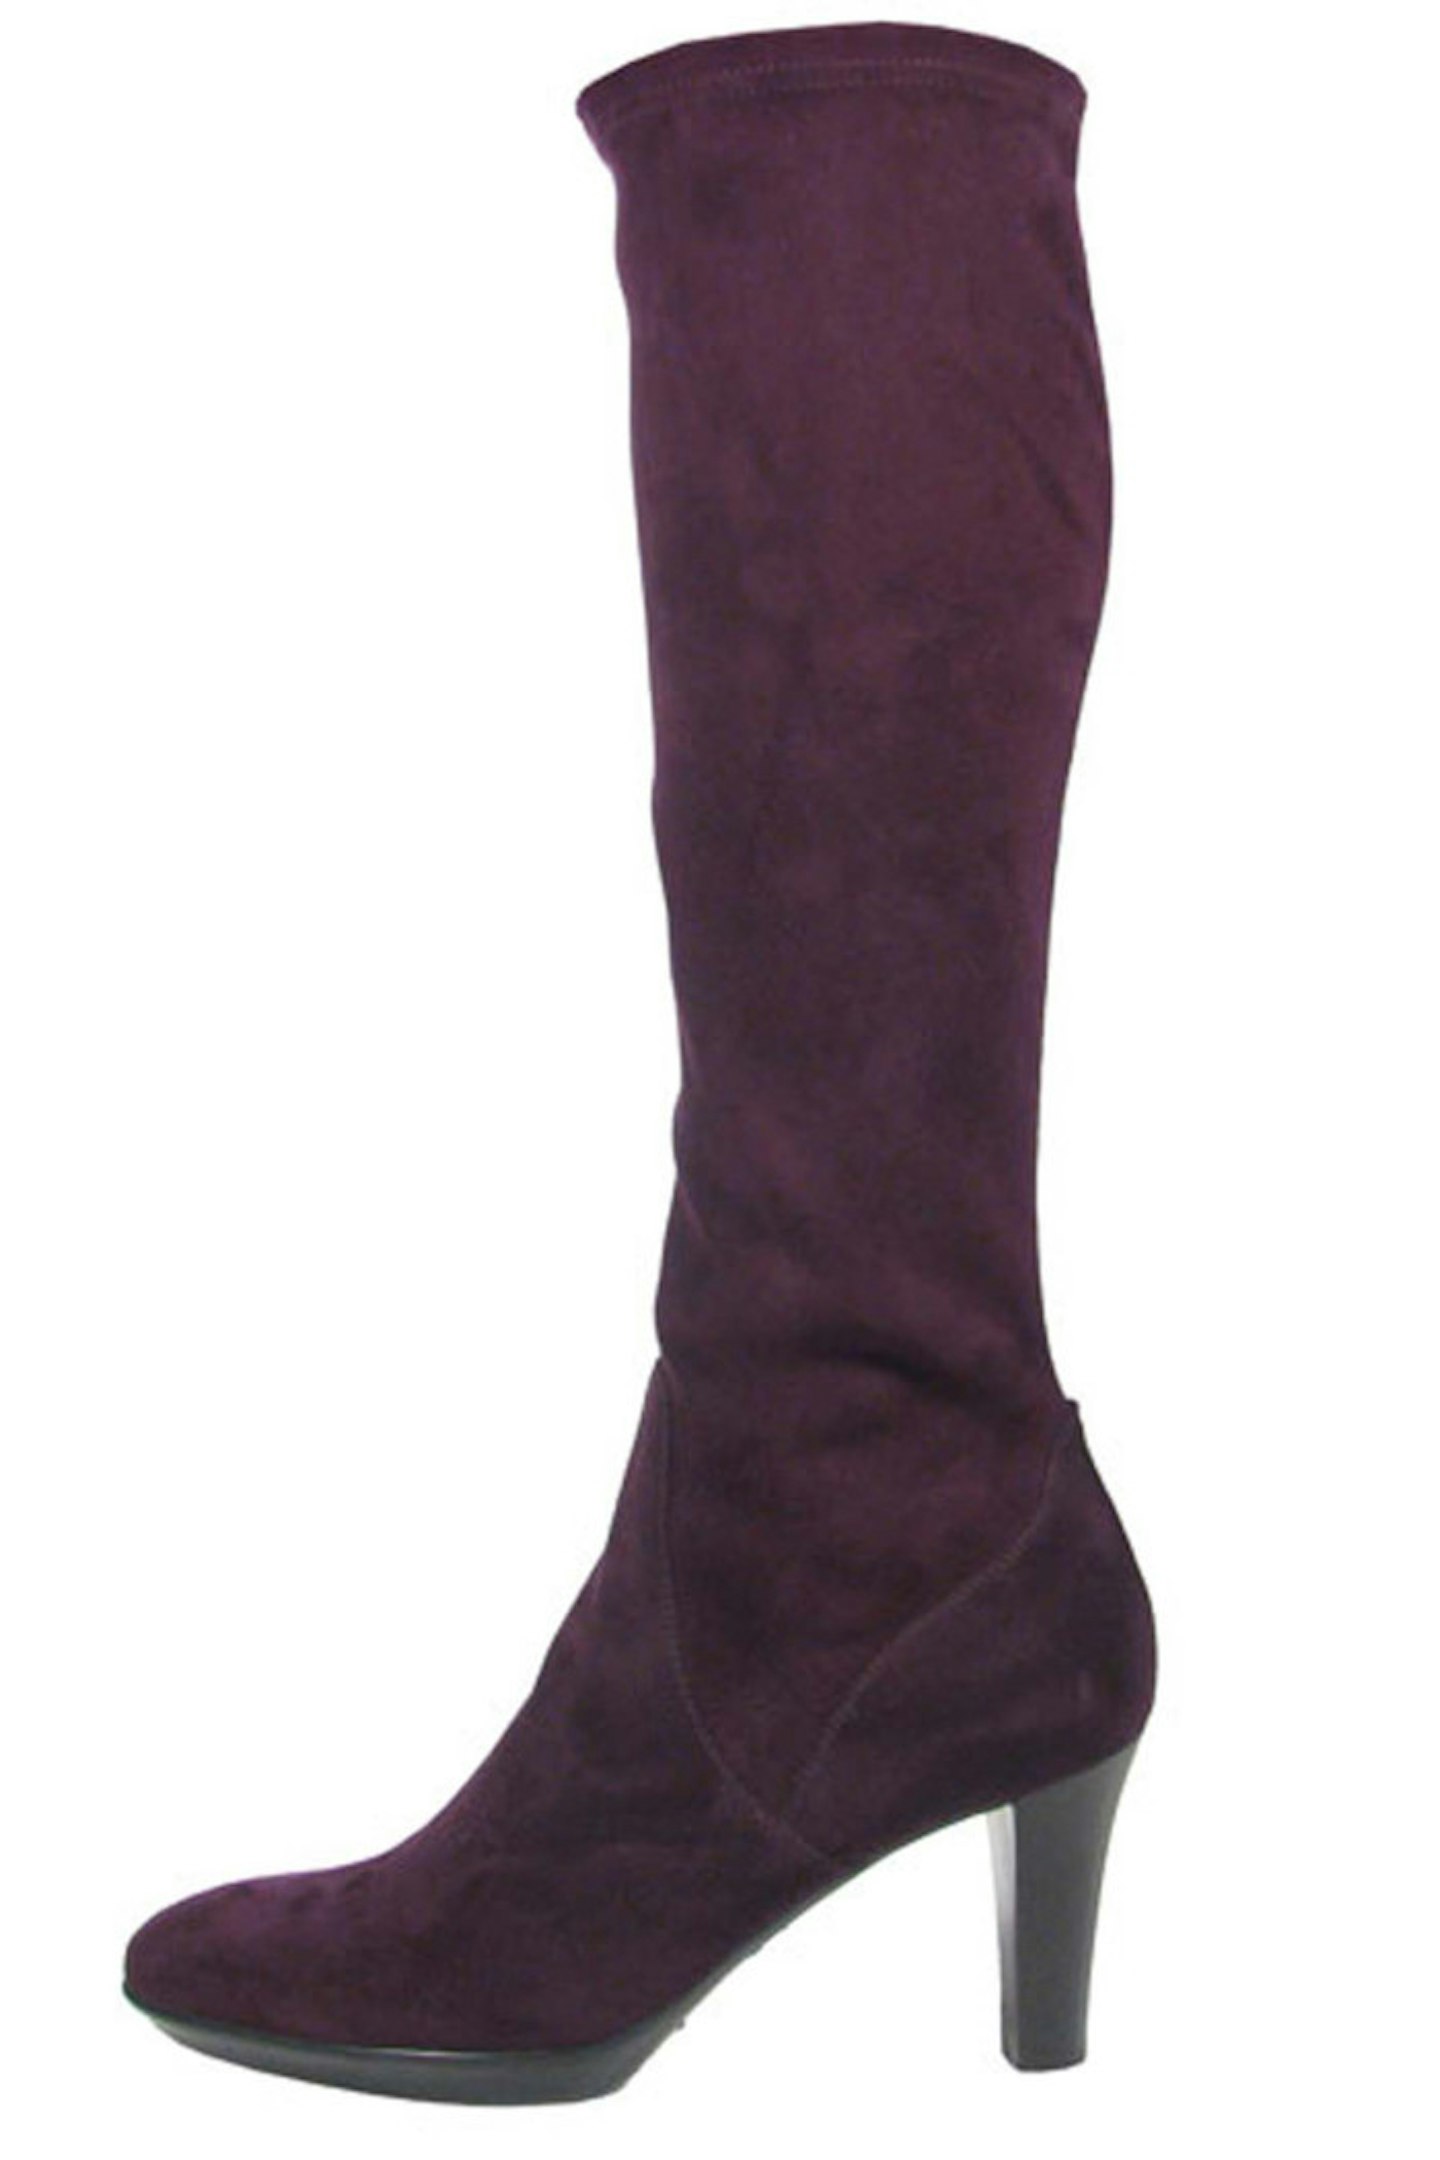 Boots, £395, Russell & Bromley